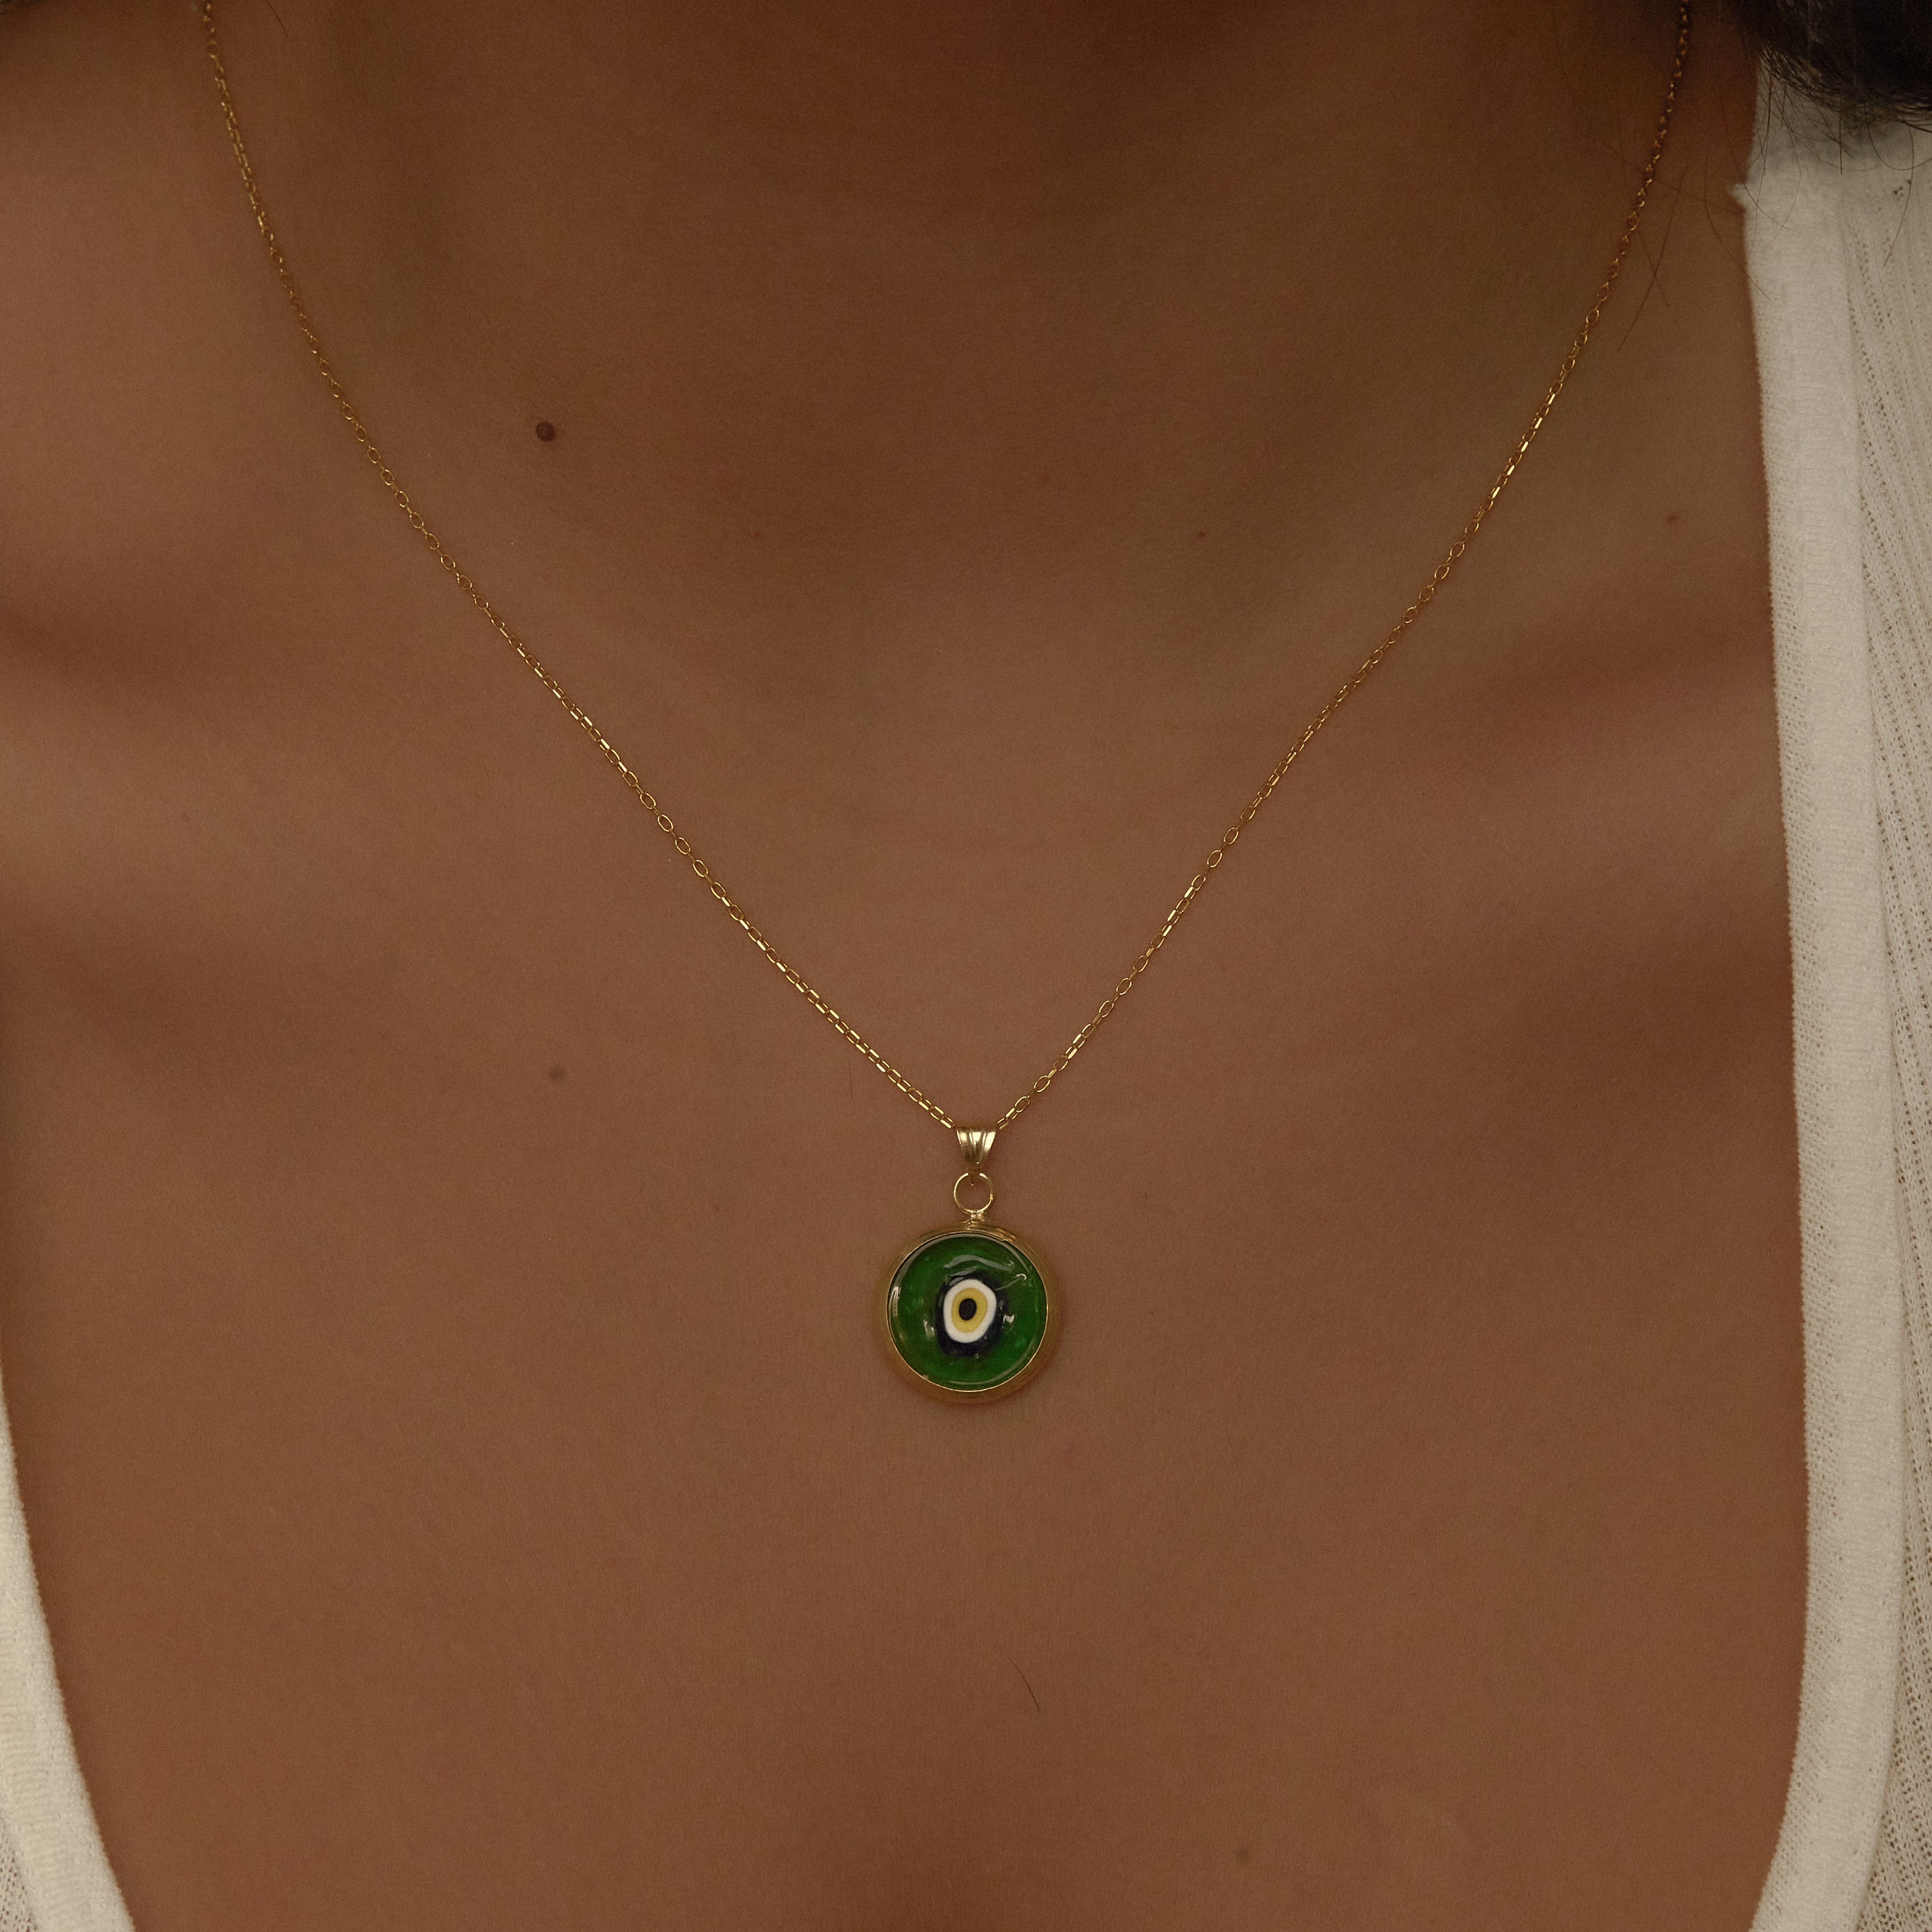 Green Evil Eye Necklace - The M Jewelers